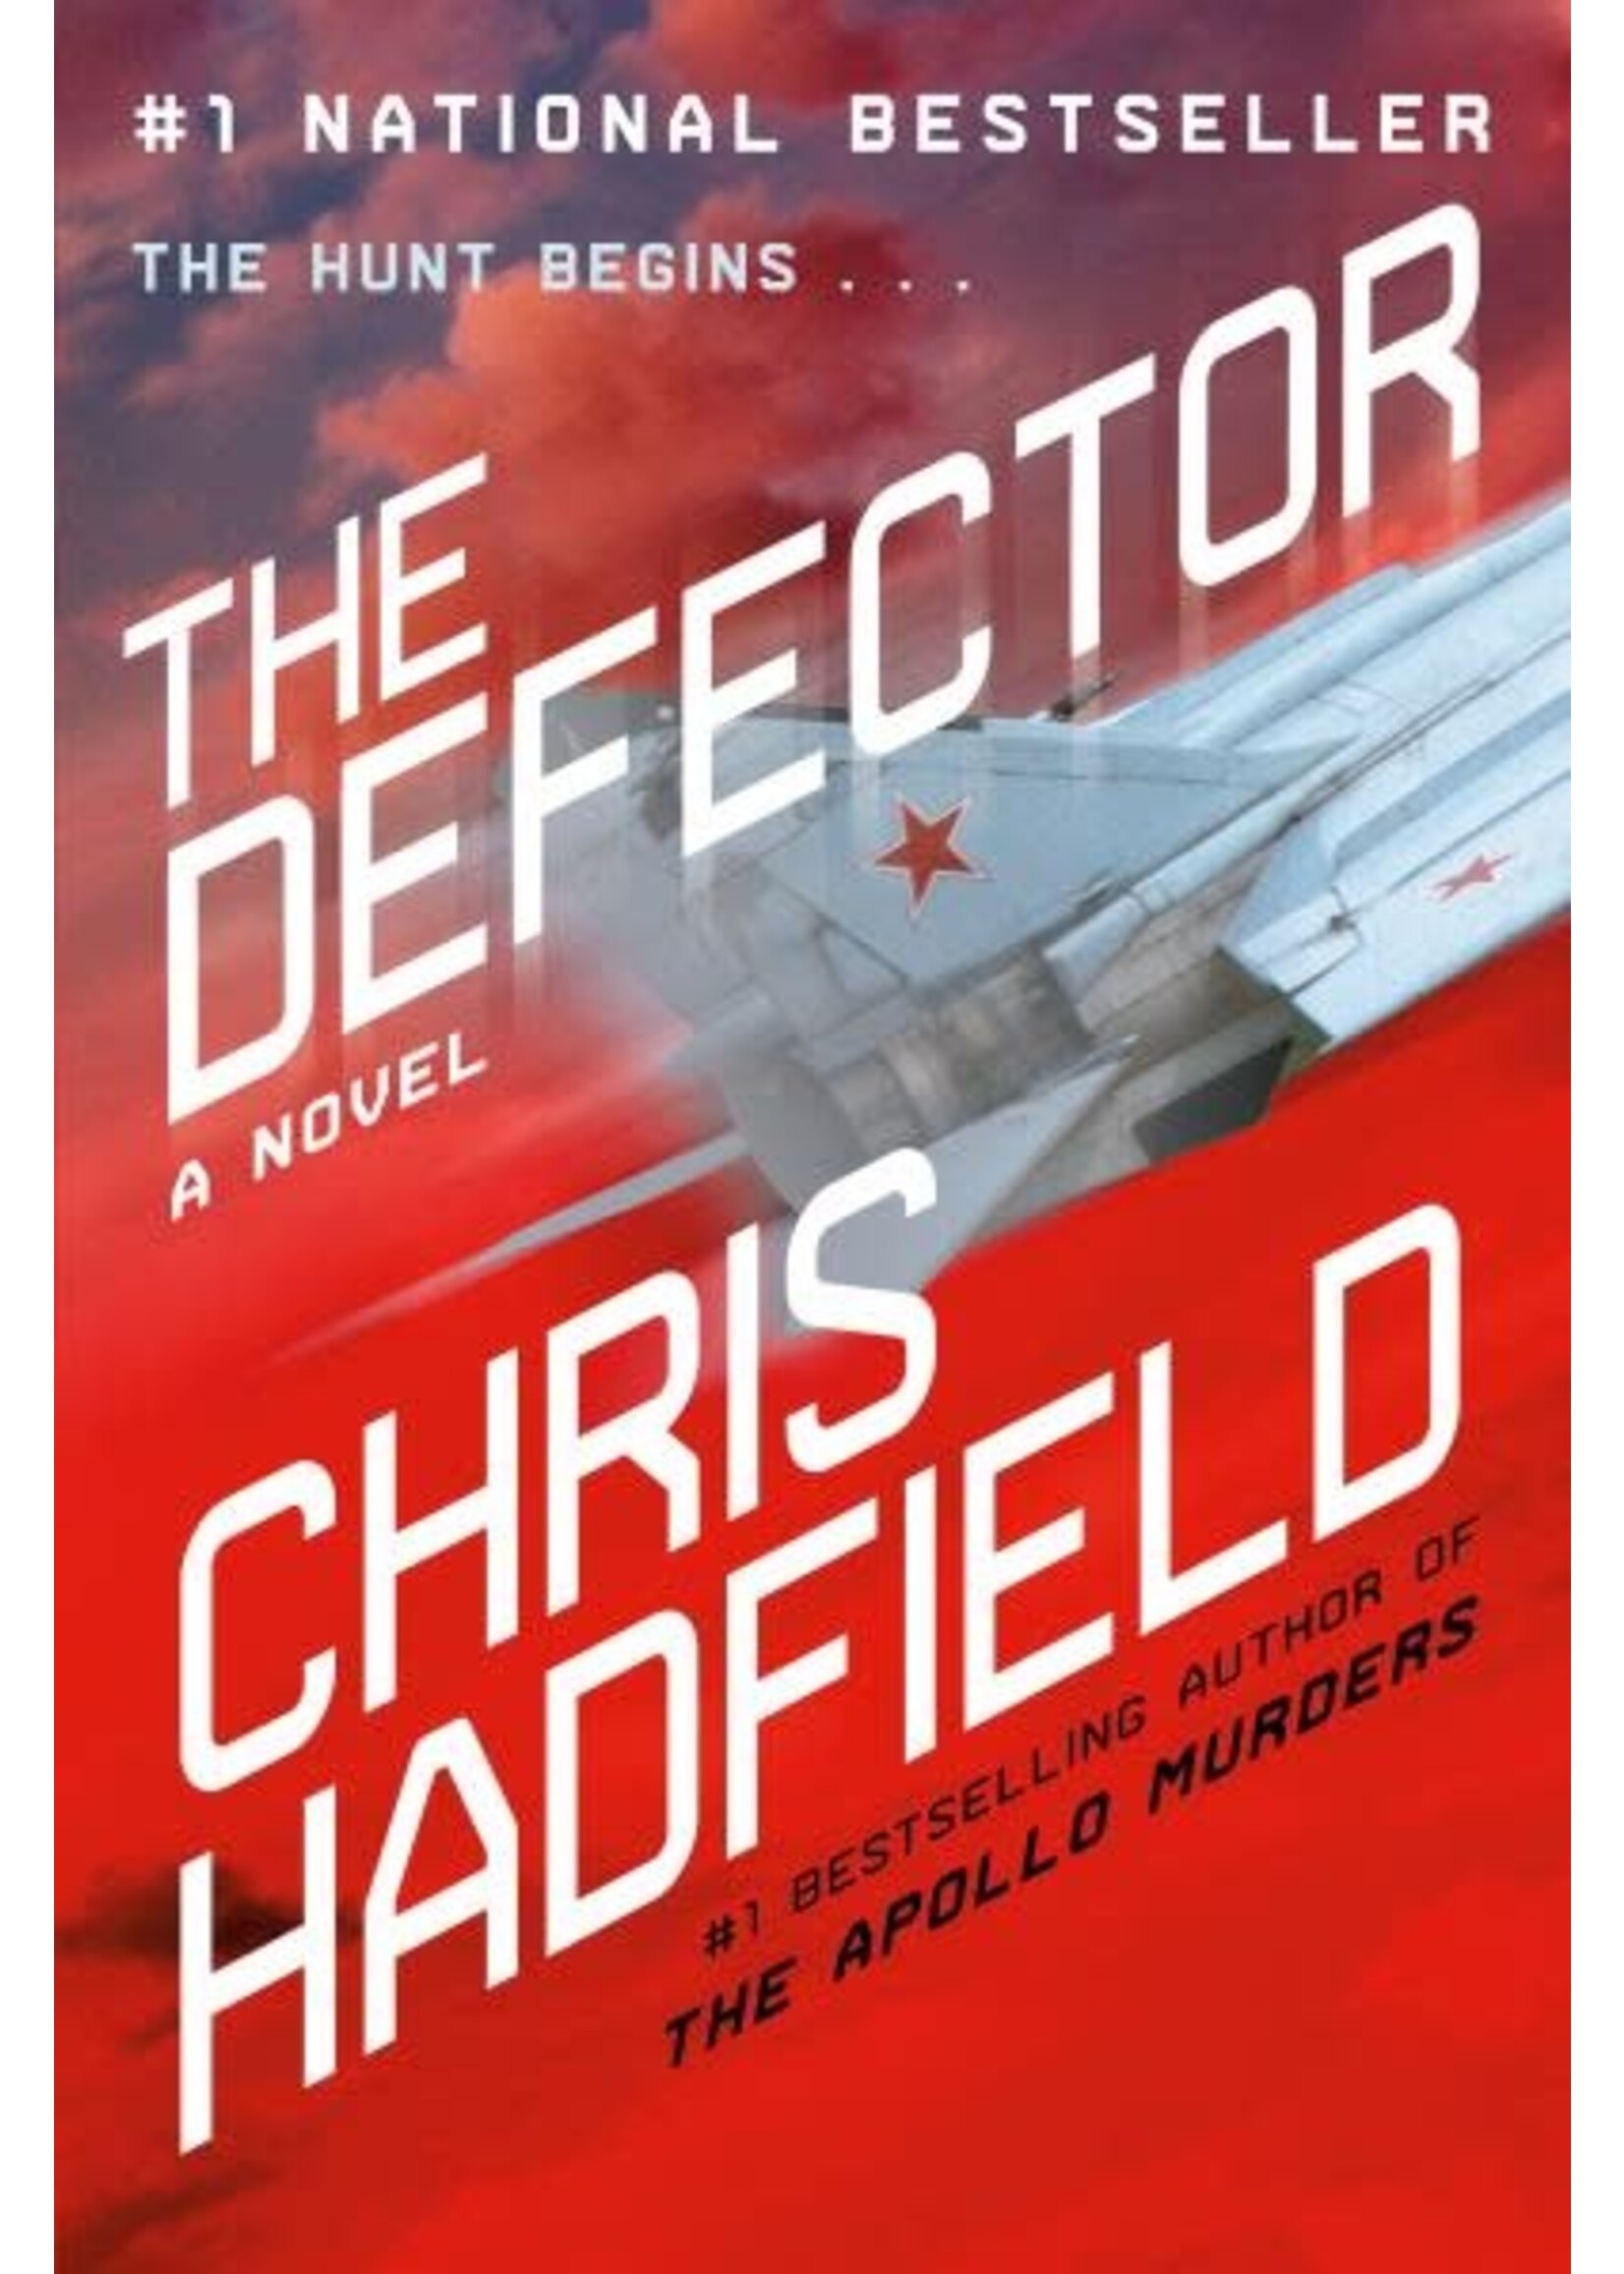 The Defector (Apollo Murders #2) by Chris Hadfield